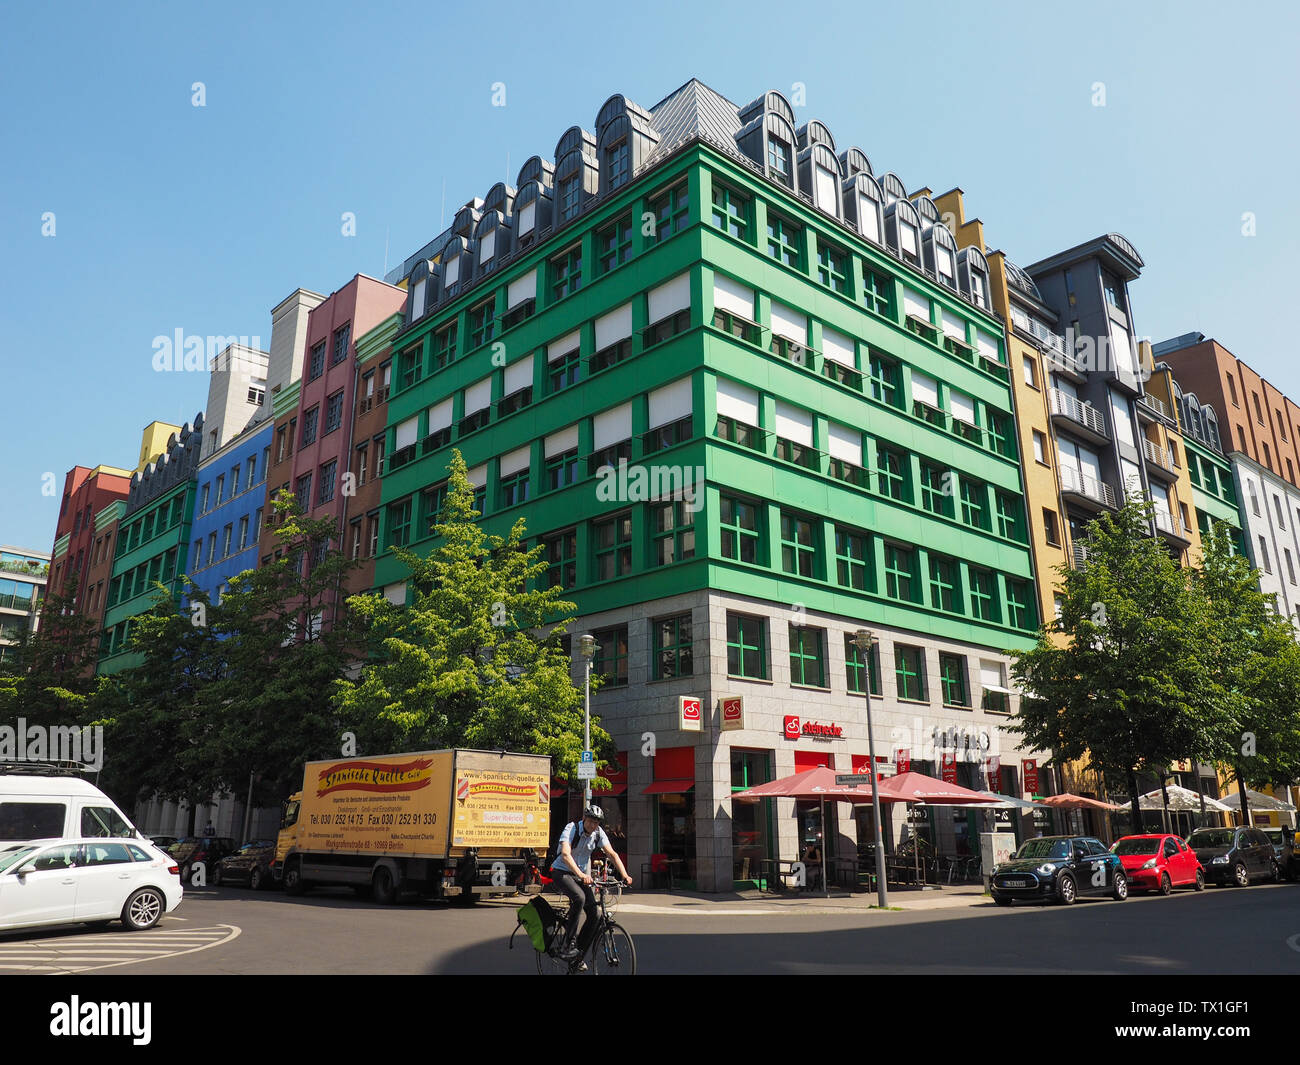 Aldo Rossi Berlin High Resolution Stock Photography And Images Alamy